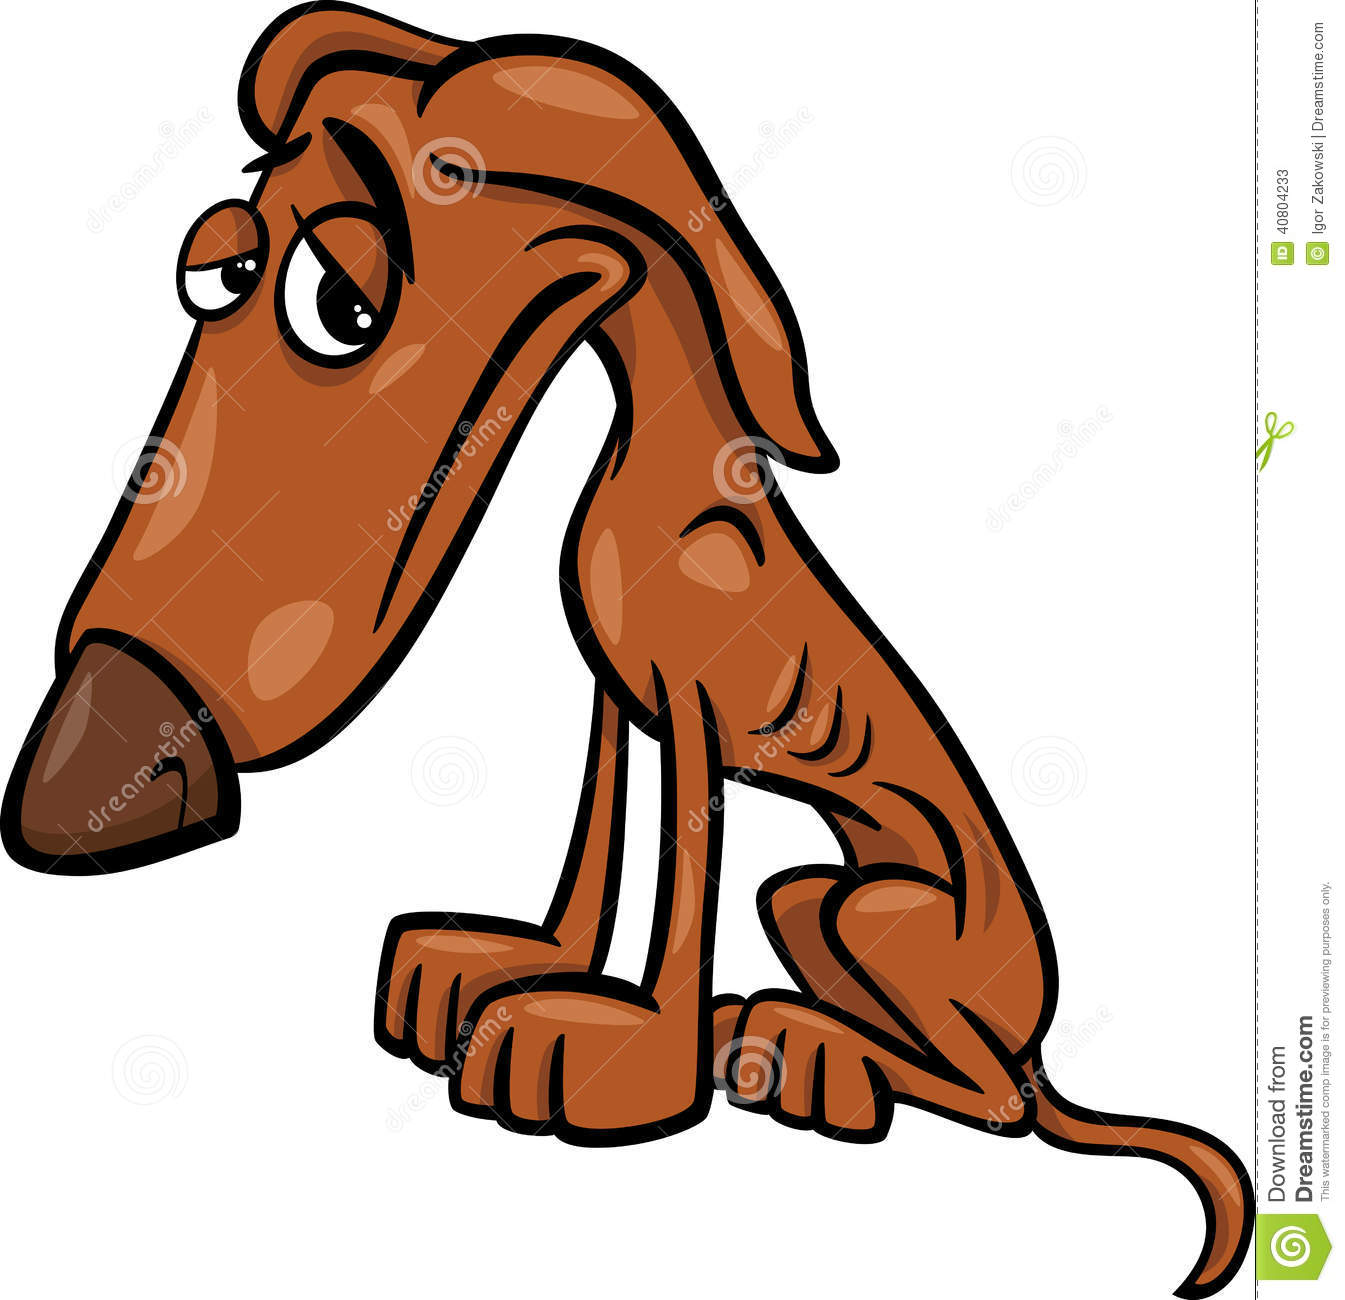 Poor Hungry Dog Cartoon Illustration Stock Vector   Image  40804233